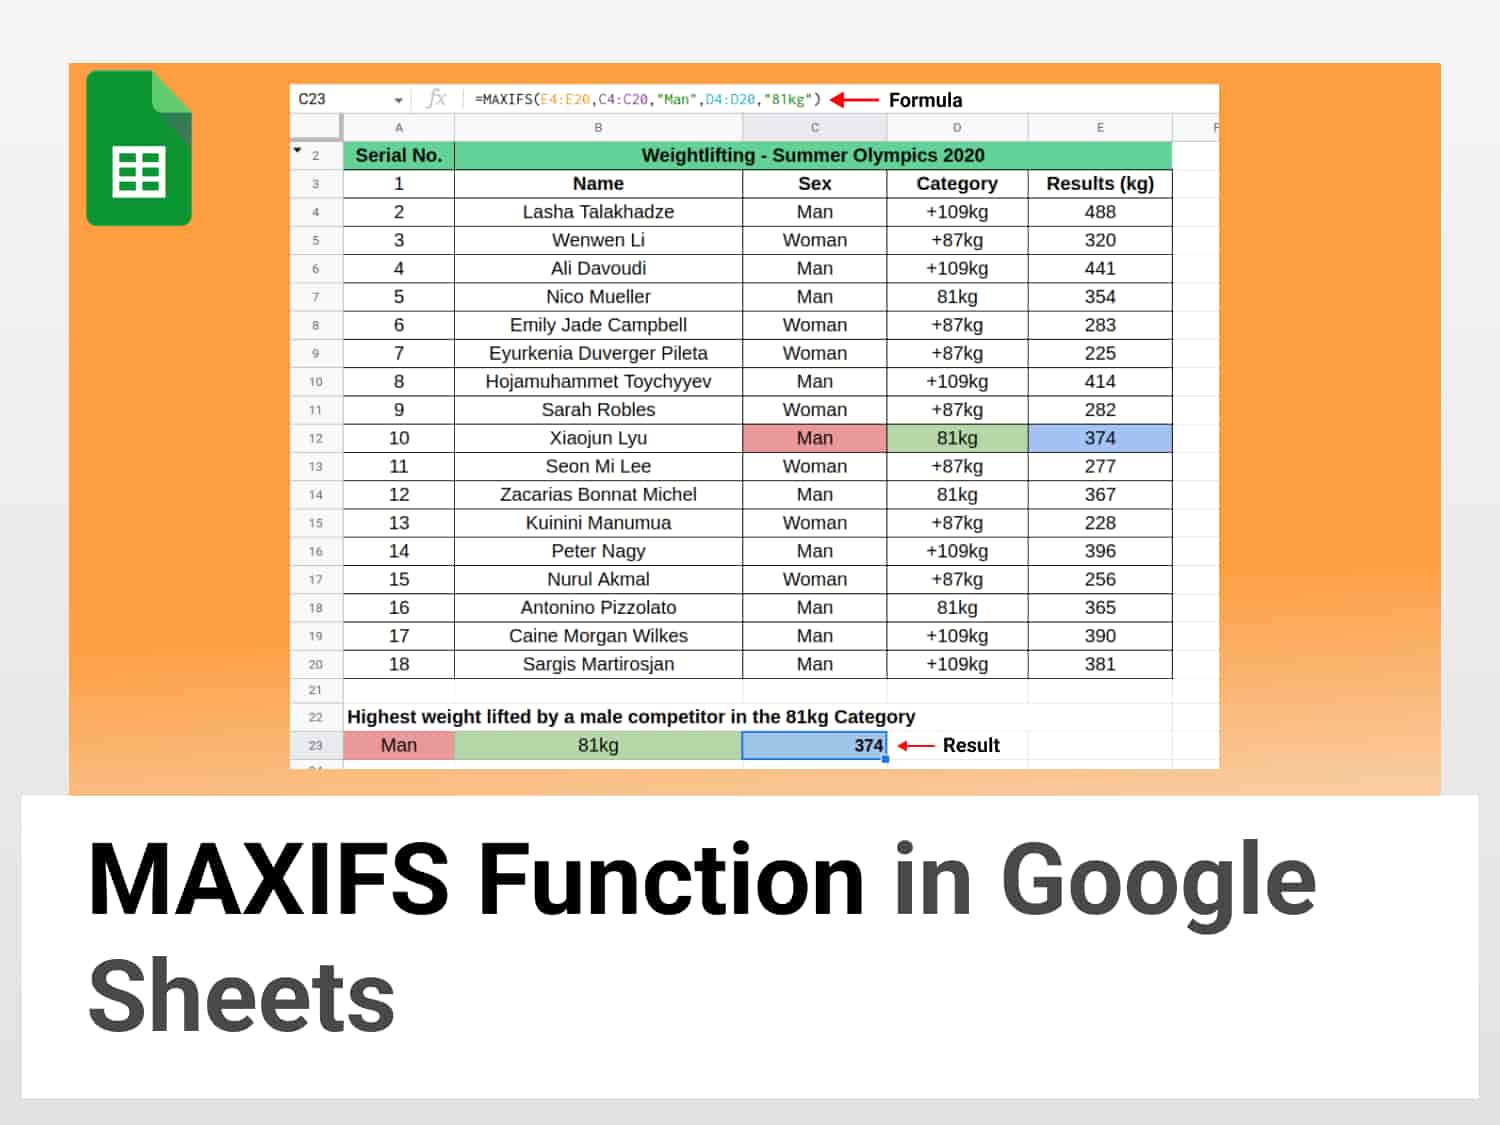 MAXIFS function in Google Sheets